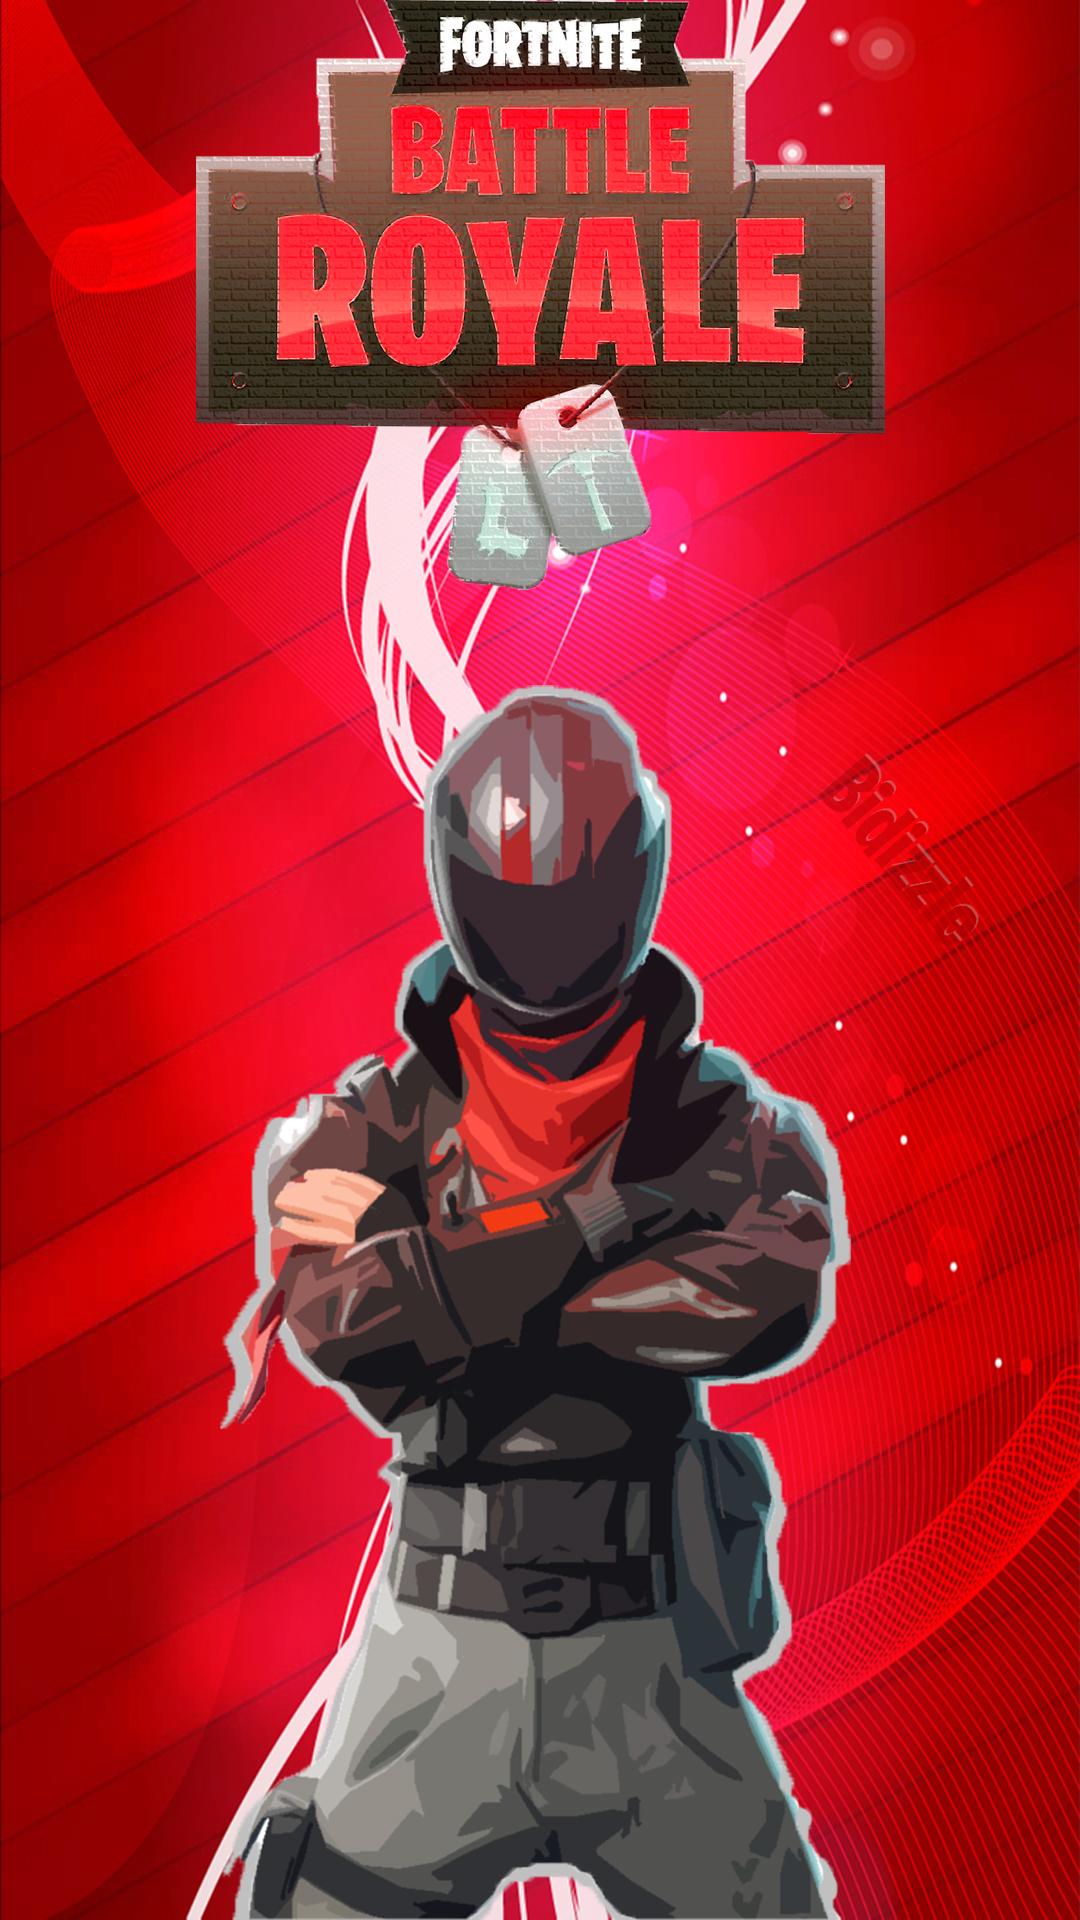 For another request Ive made a Burnout wallpaper FortNiteBR